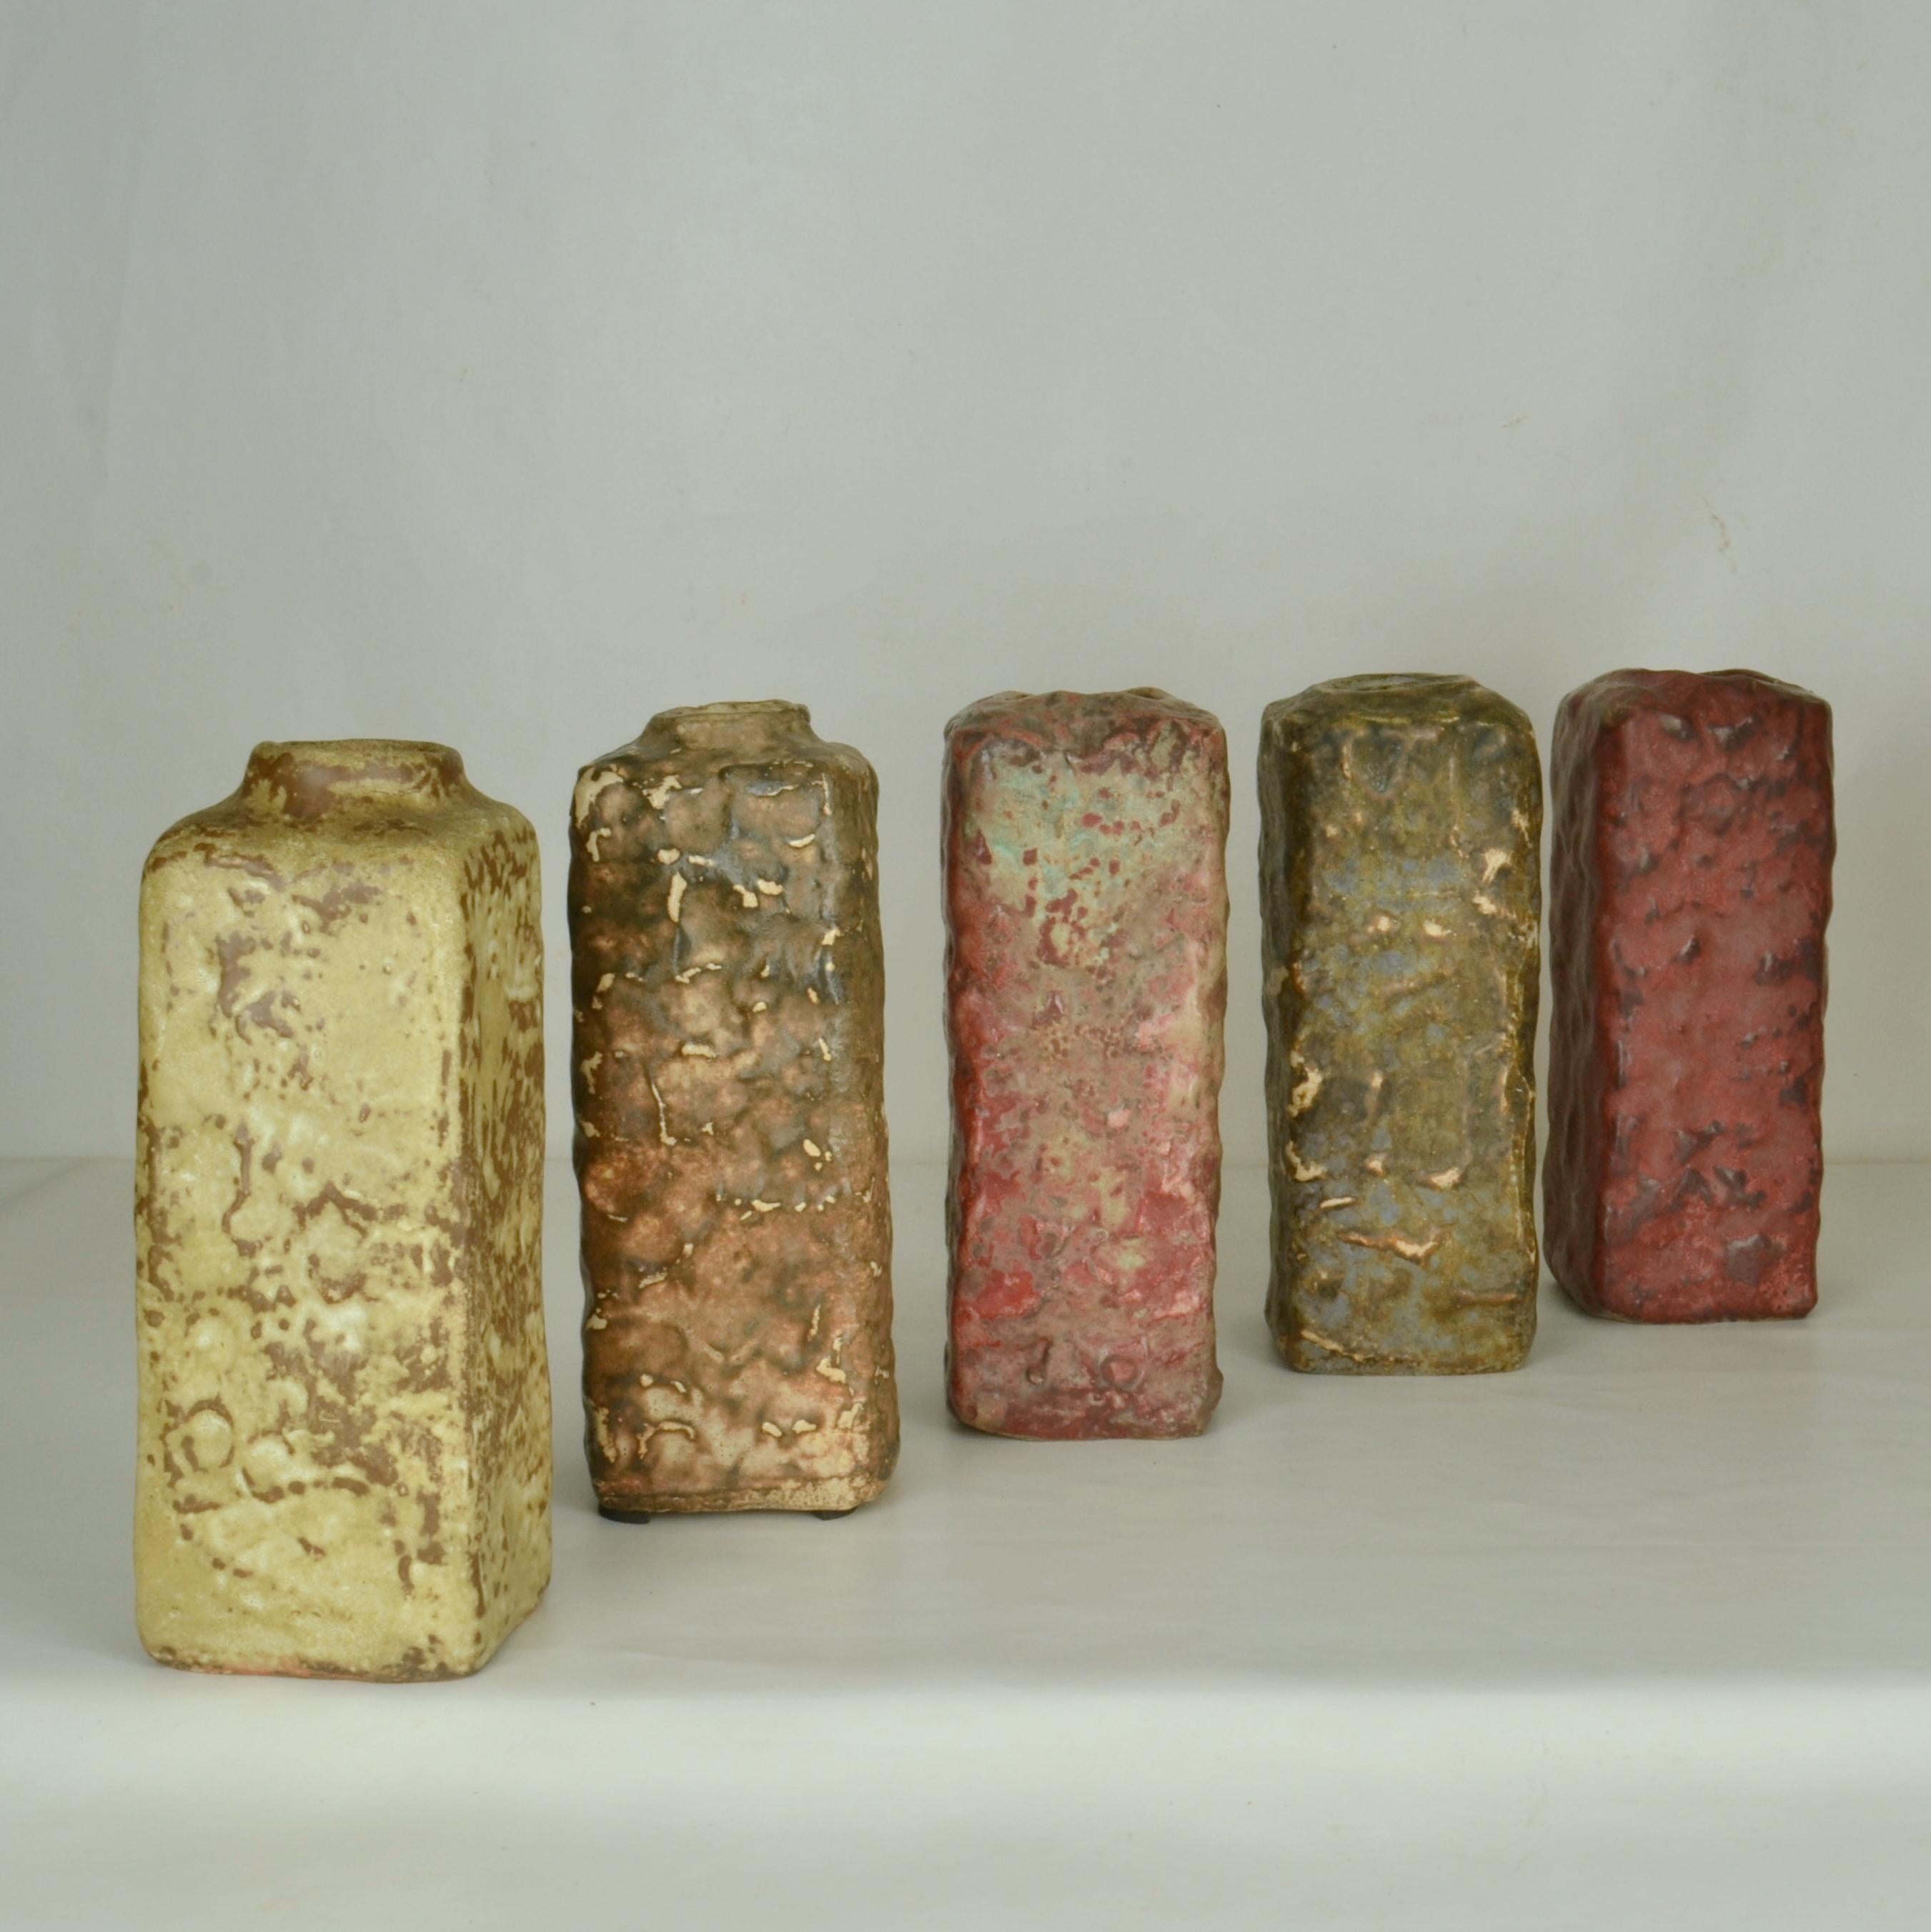 Five Mid-Century Modern square studio pottery vases glazed in natural earth tones that vary from dark red, grey-green to brown. They are hand formed and in different heights by Mobach's Dutch ceramist in the 1960's. 
The multi color glazes are made